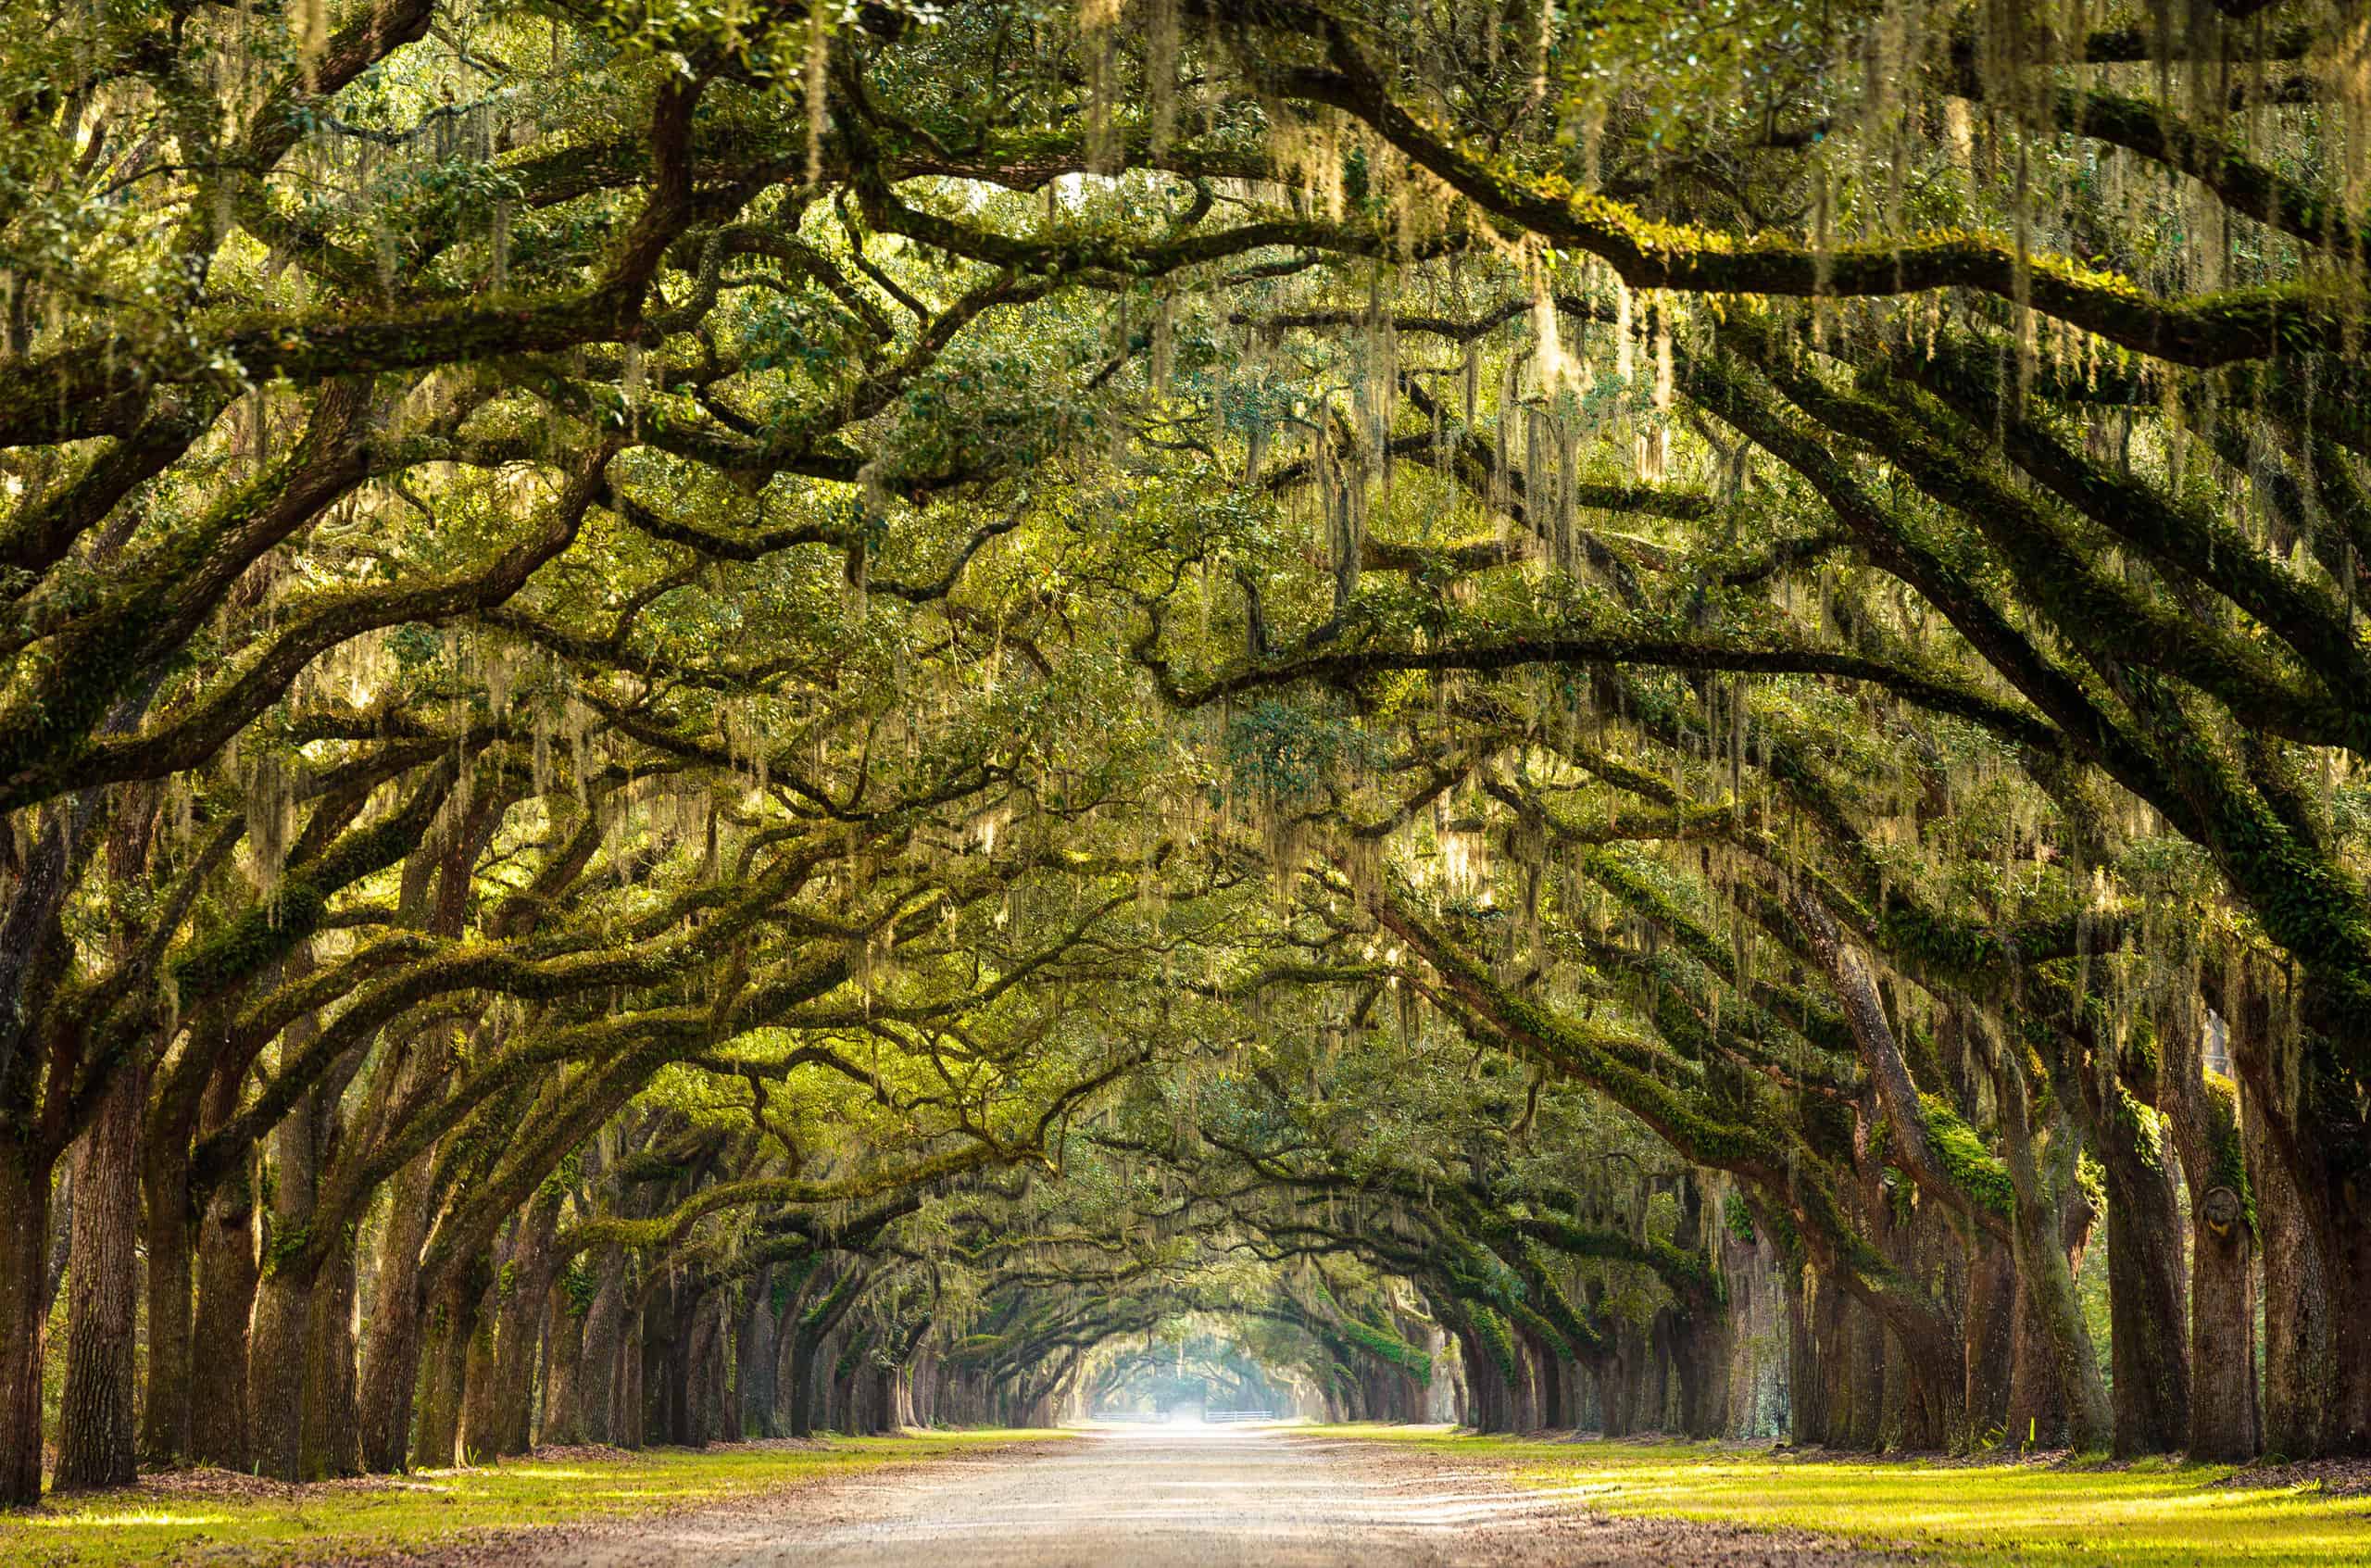 A path created by stunning , large live oak trees, draped with Spanish moss. At least 20 mature tress line each side of the path.